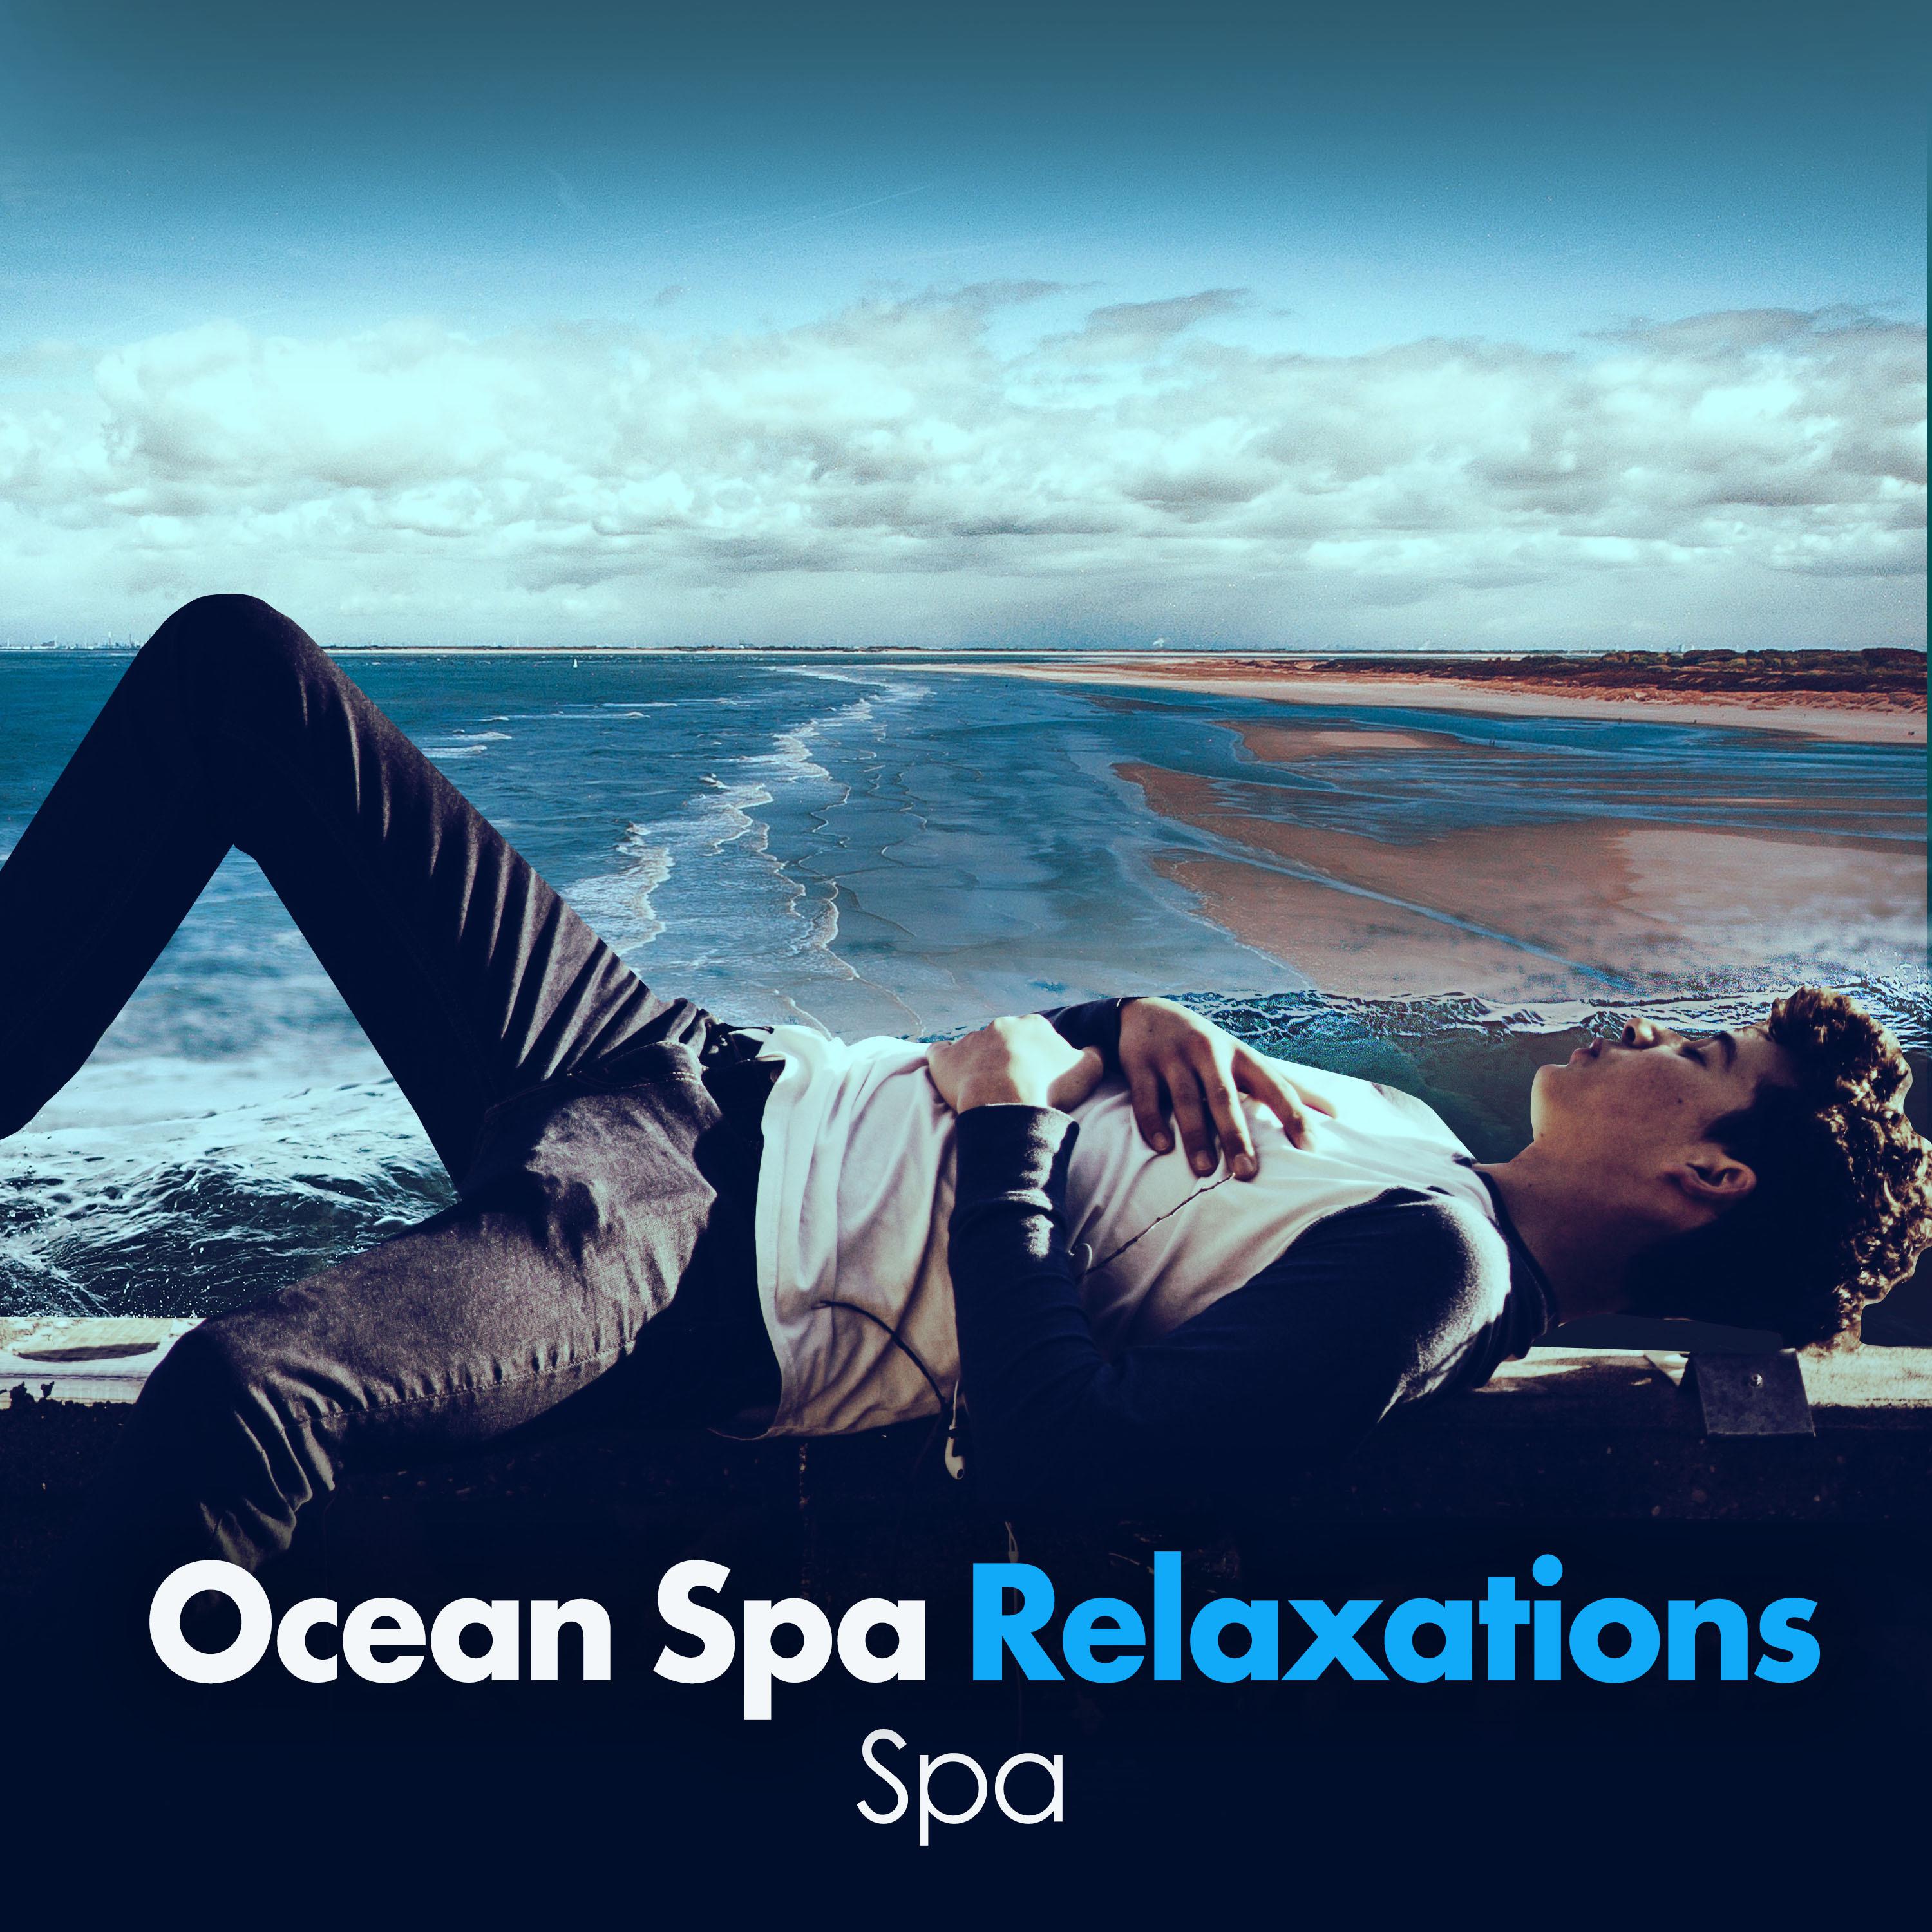 Ocean Spa Relaxations